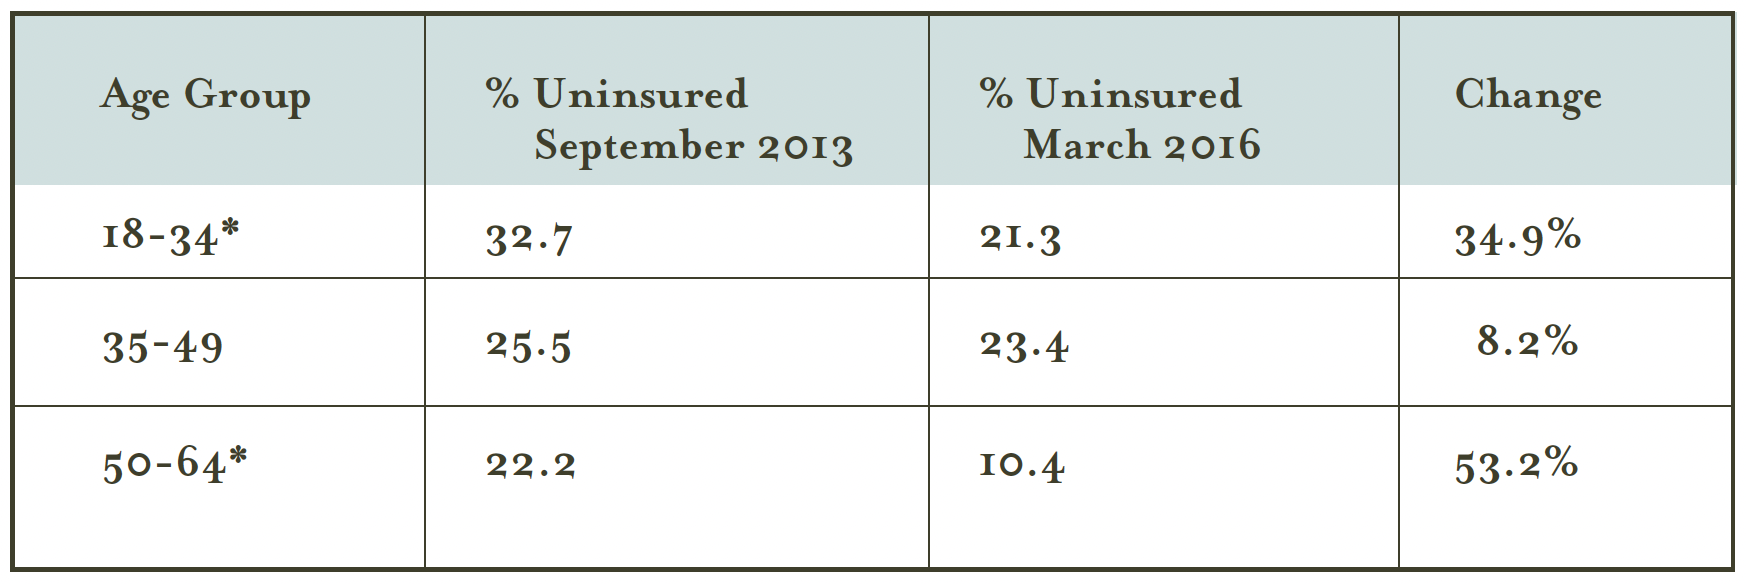 This table compares the changes in the uninsured rates amongst different age groups over time.